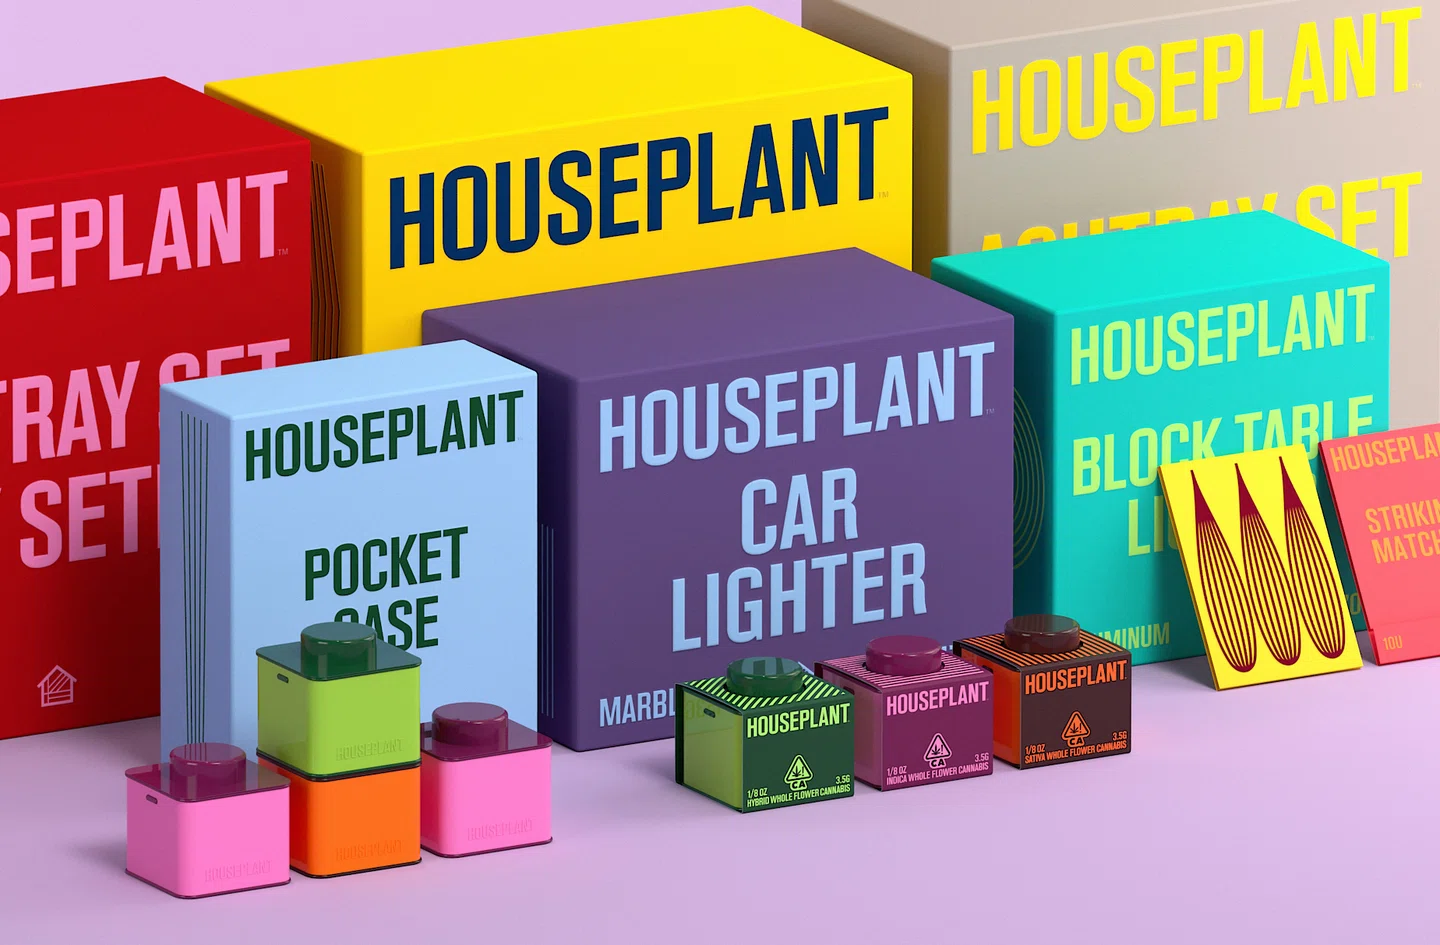 Get ready to throw your wallet at Seth Rogen's rebranded cannabis brand  Houseplant, which stacks like lego